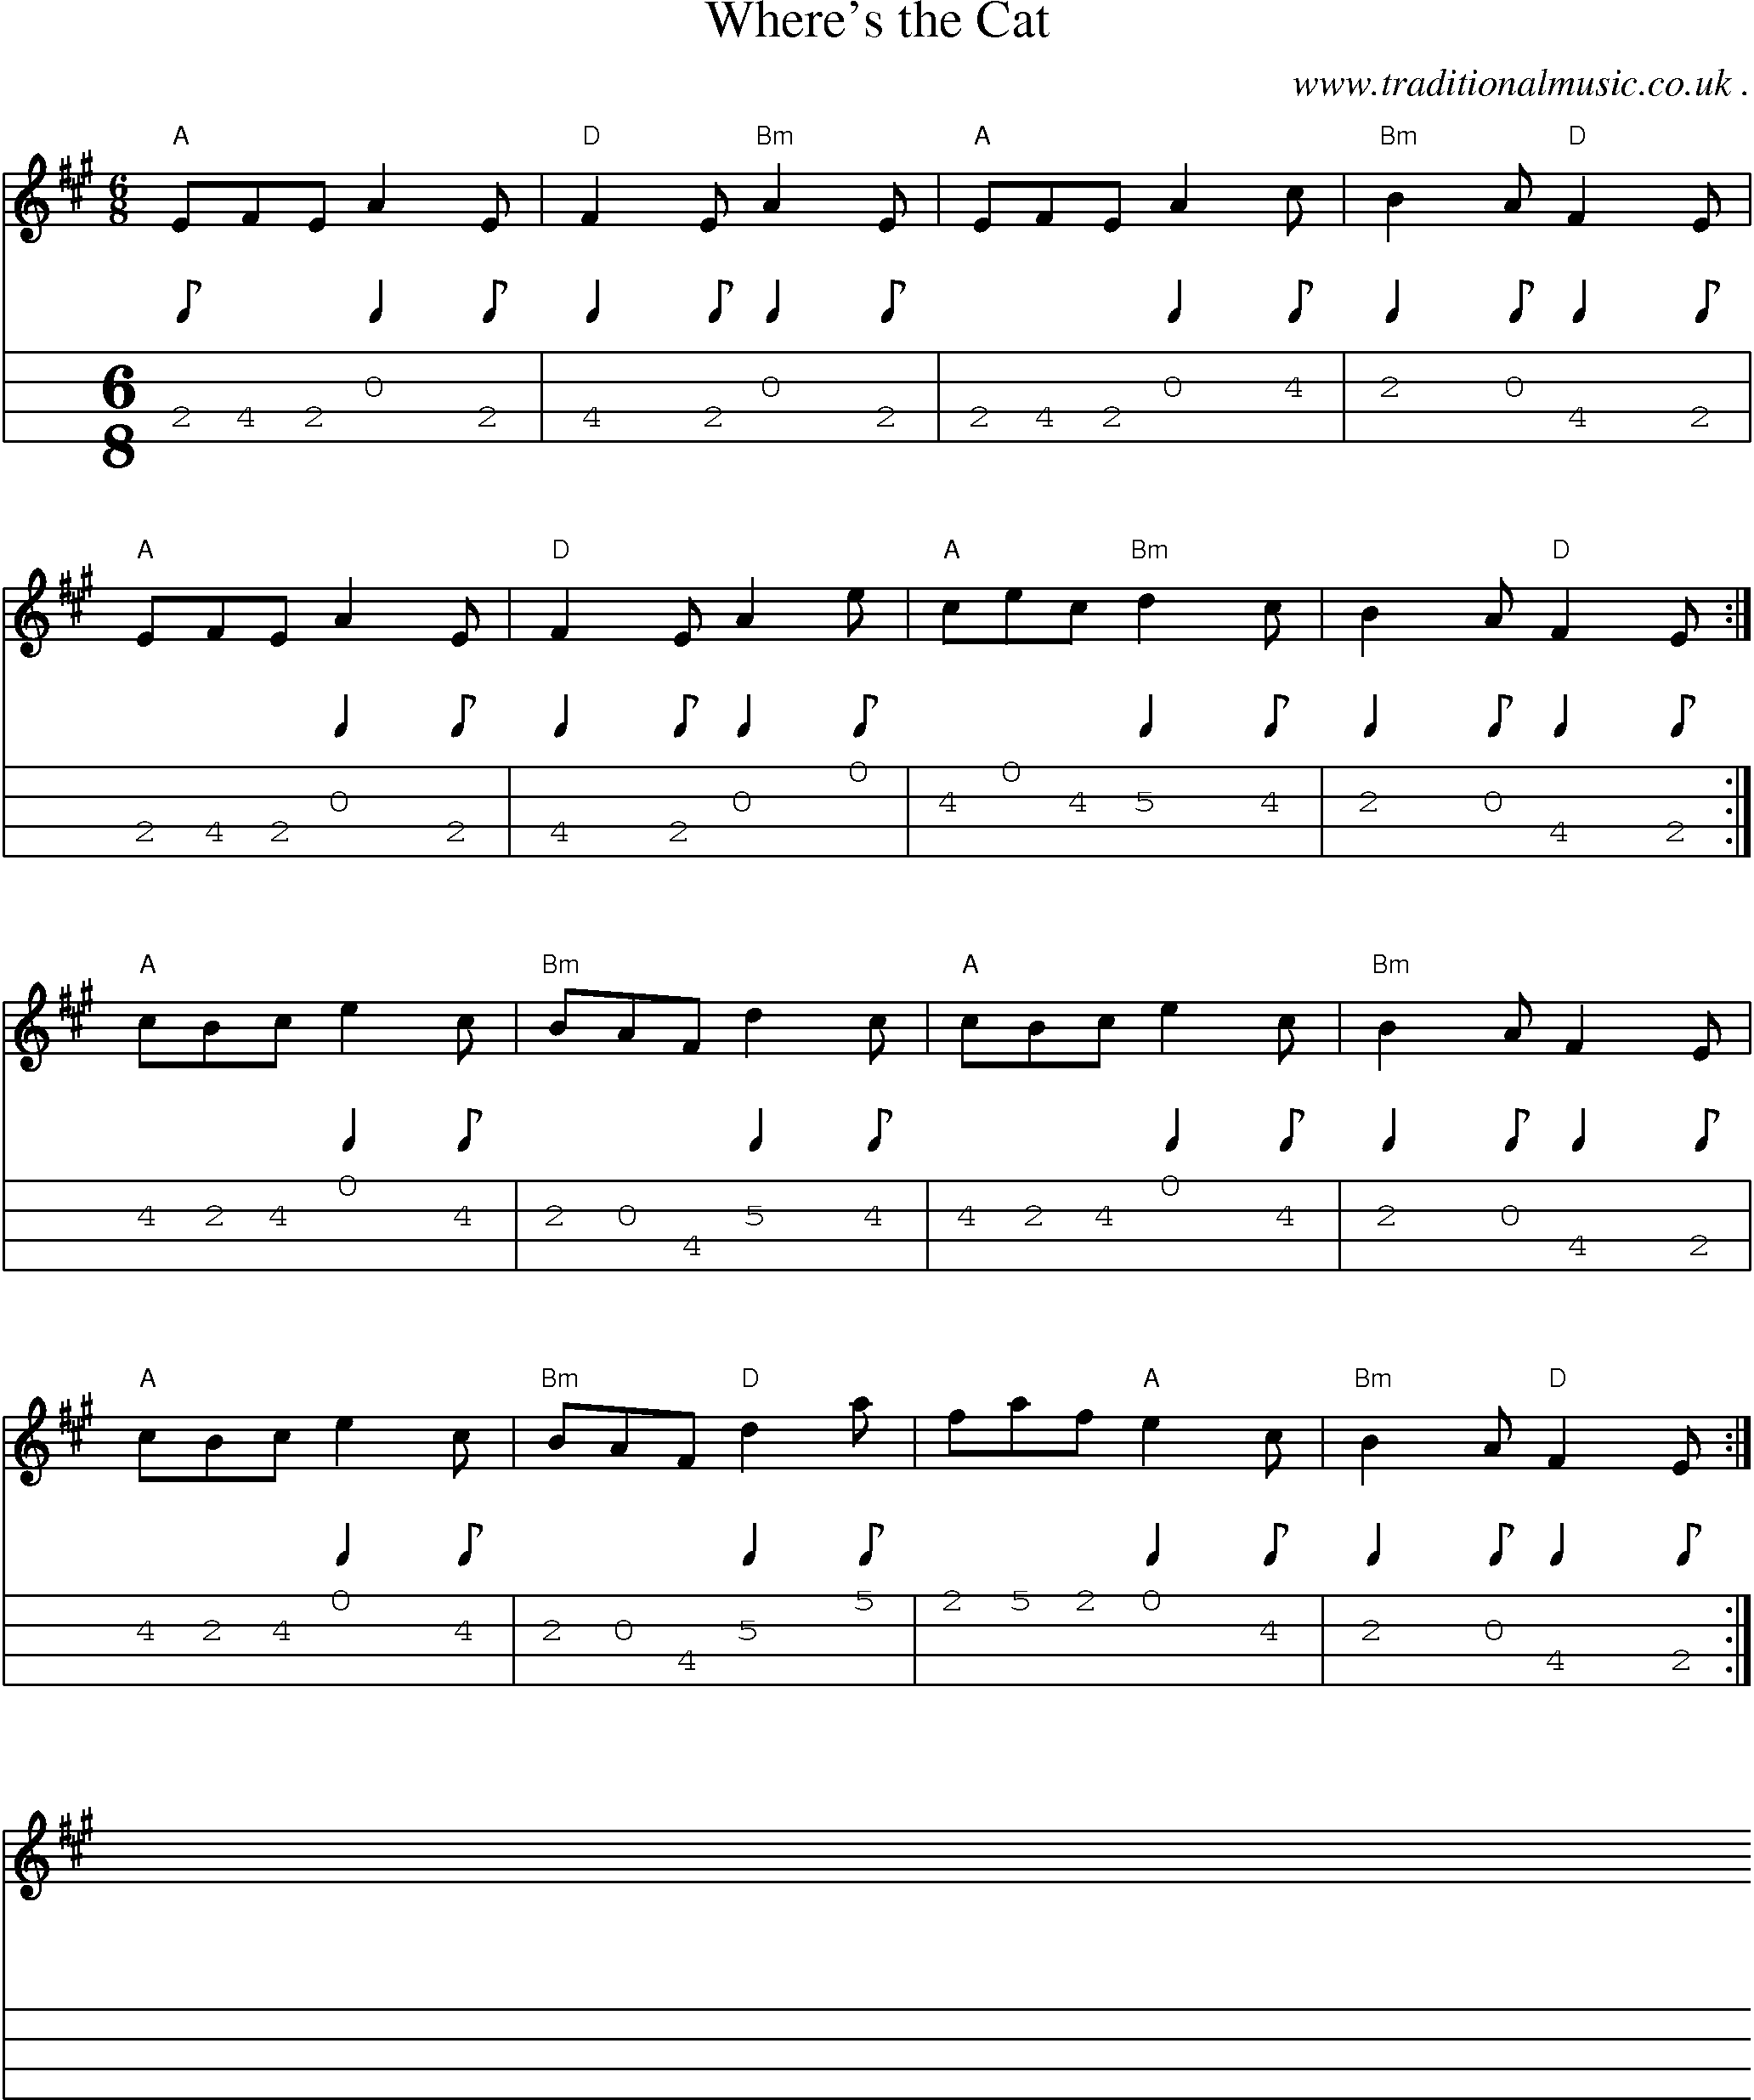 Sheet-music  score, Chords and Mandolin Tabs for Wheres The Cat